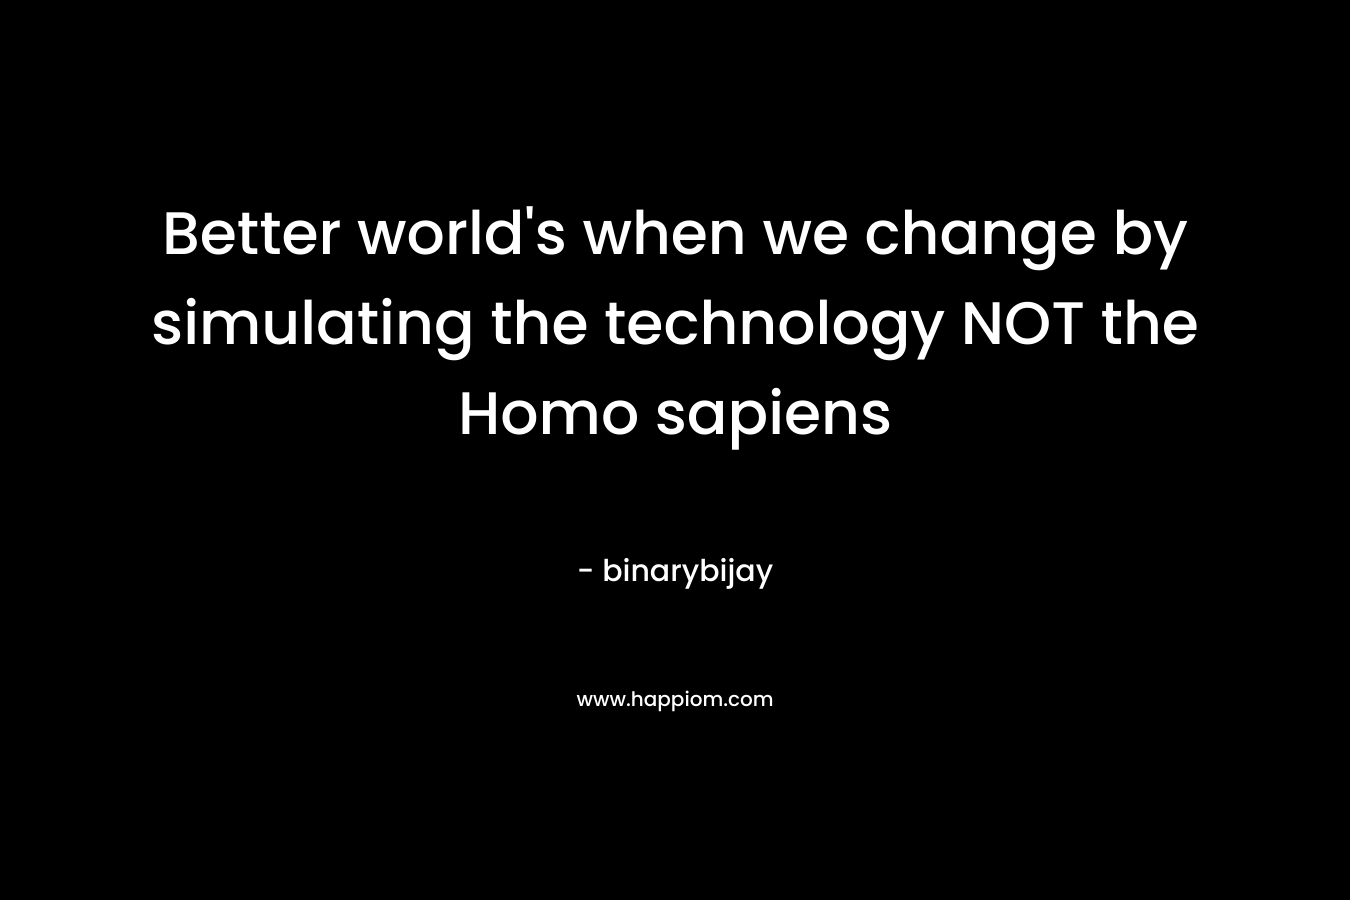 Better world's when we change by simulating the technology NOT the Homo sapiens